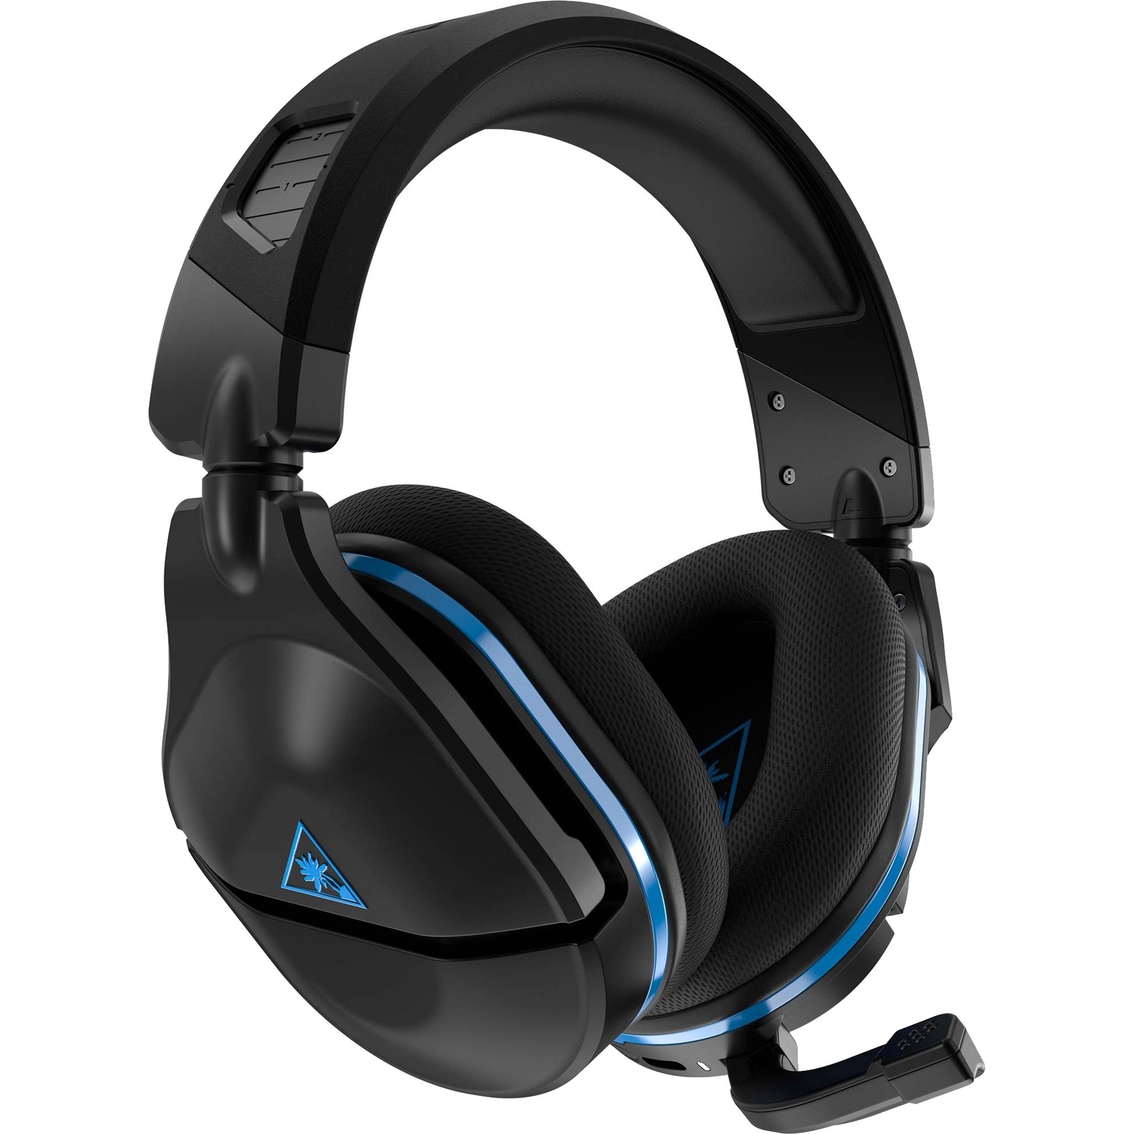 Turtle Beach Stealth 600 Gen 2 USB Wireless Amplified Gaming Headset - Image 3 of 7